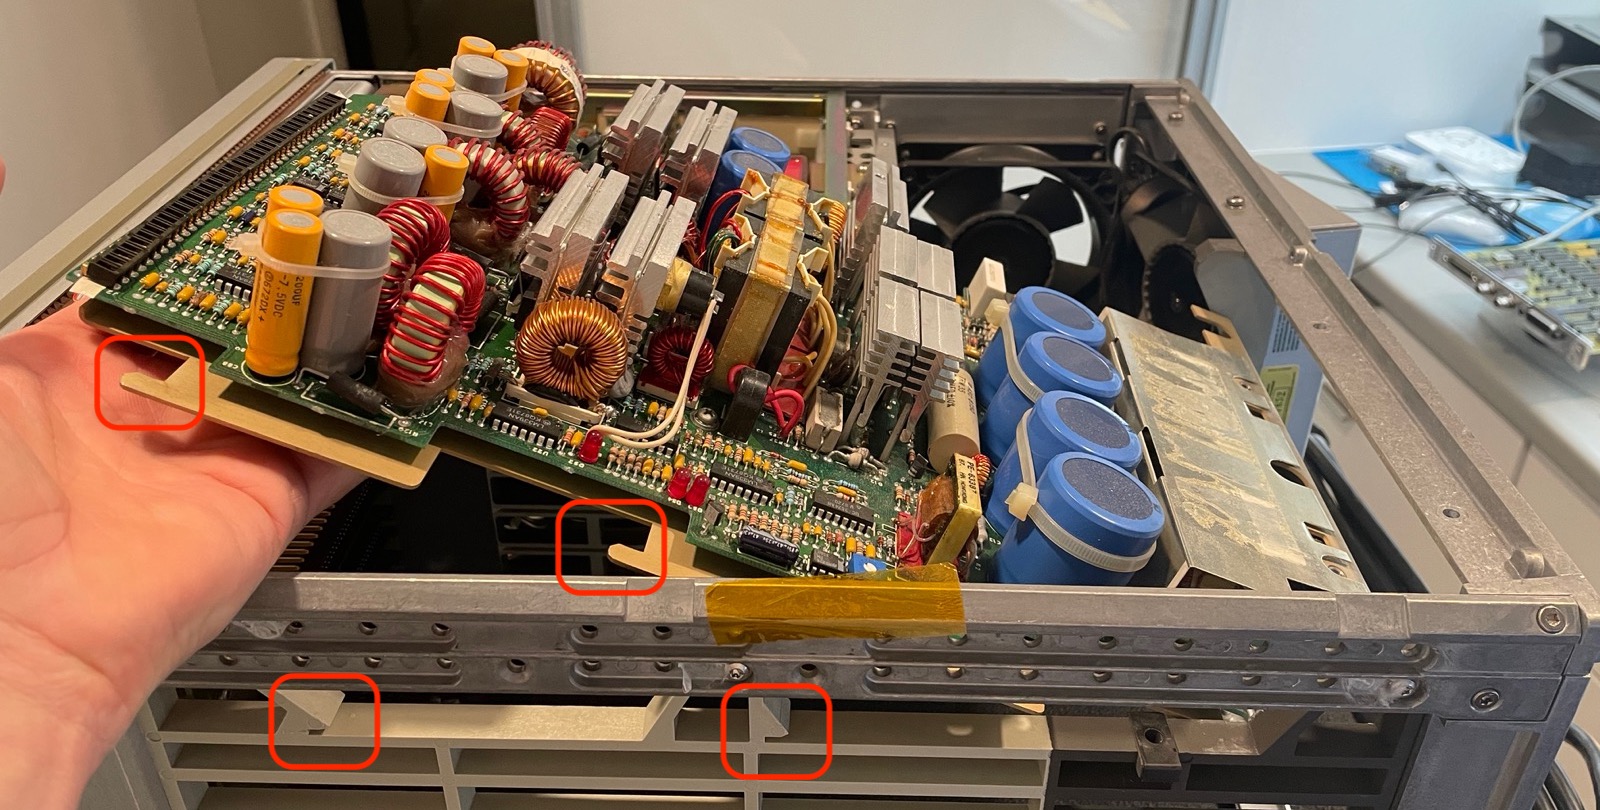 Remove back power supply